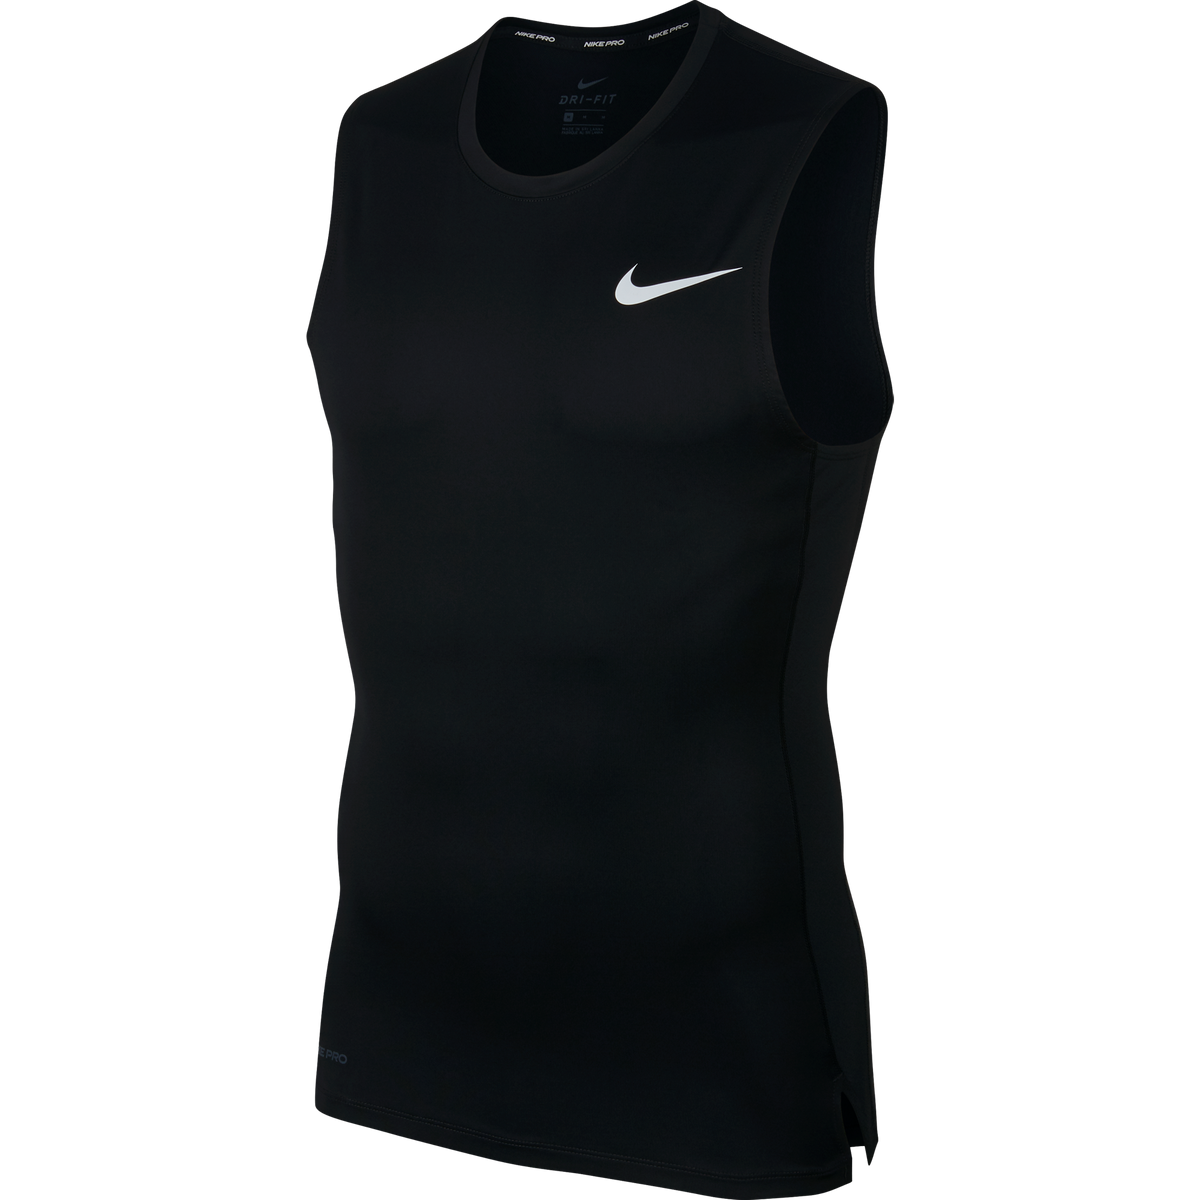 Nike Pro Compression Sleeveless Top Bv5600-084